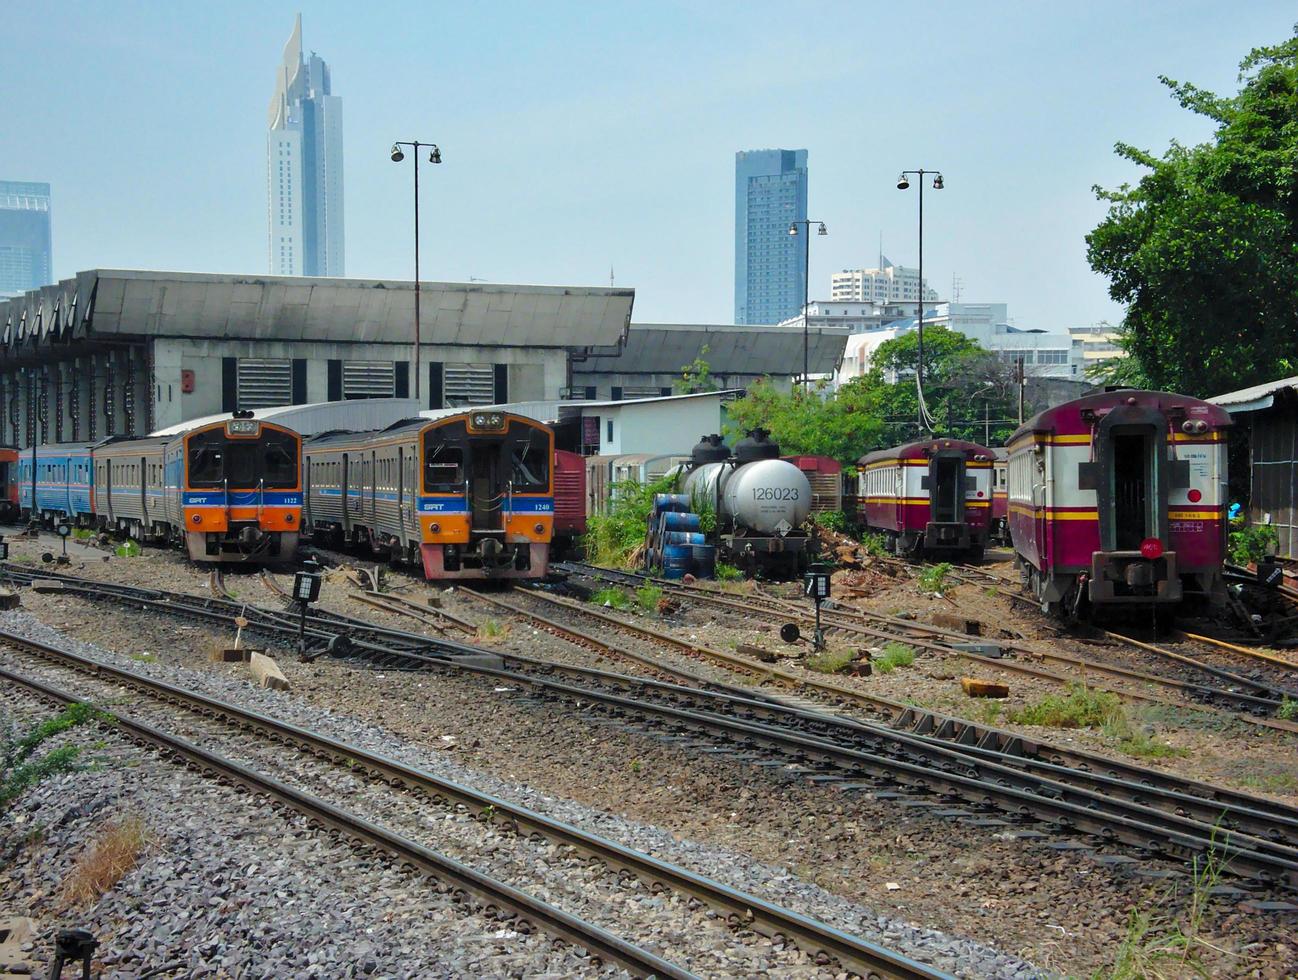 BANGKOK THAILAND08 APRIL 2019The locomotive and the Thai train are parked at the parking garage of the State Railway of Thailand at Hua Lamphong Railway Station. photo